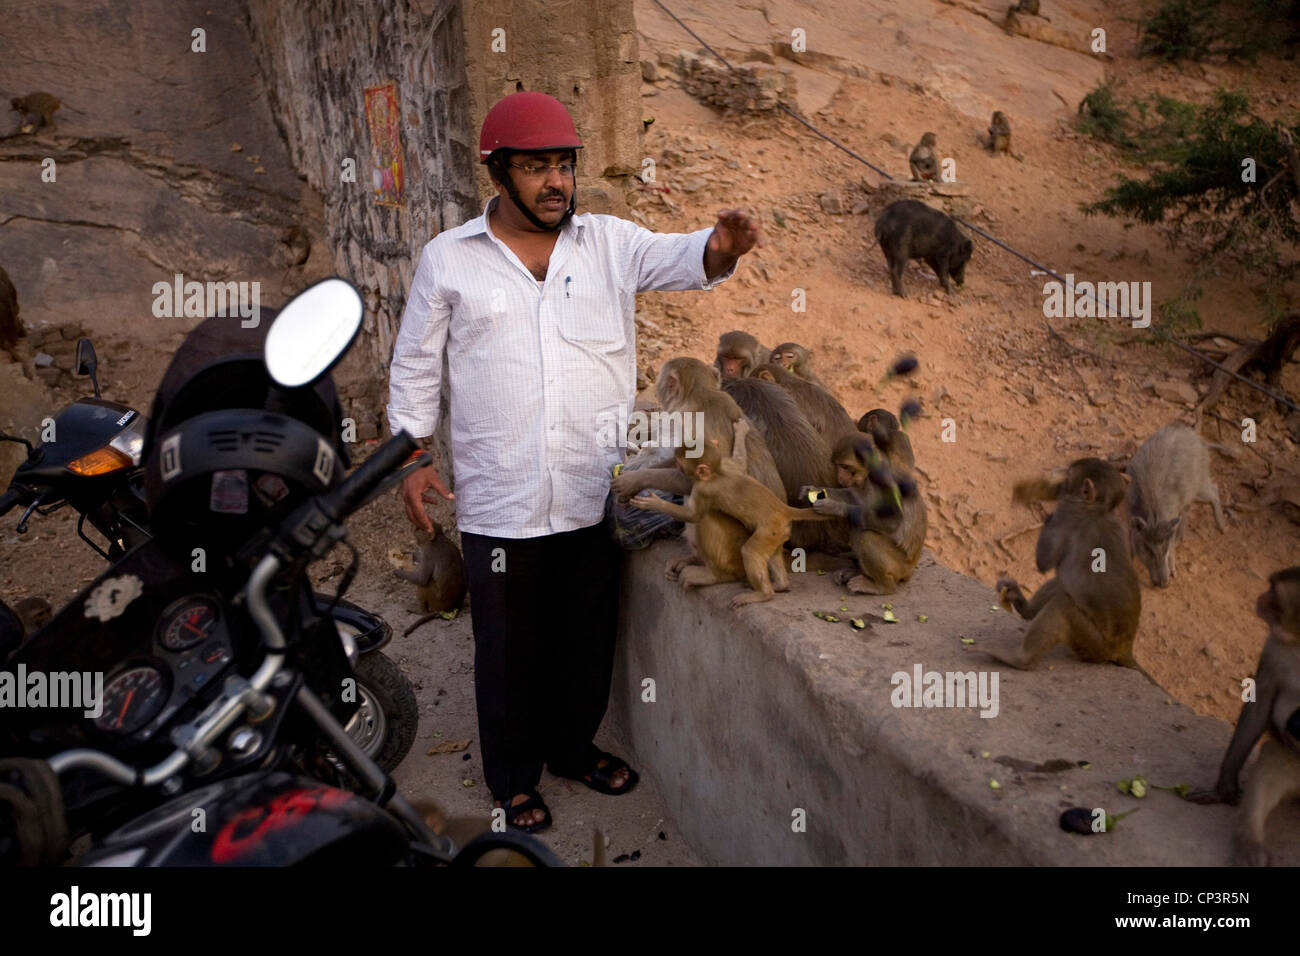 A man feed the monkeys on the path up the mountainside at Galta and the Surya Mandir (known as the Monkey Temple), Jaipur, India Stock Photo